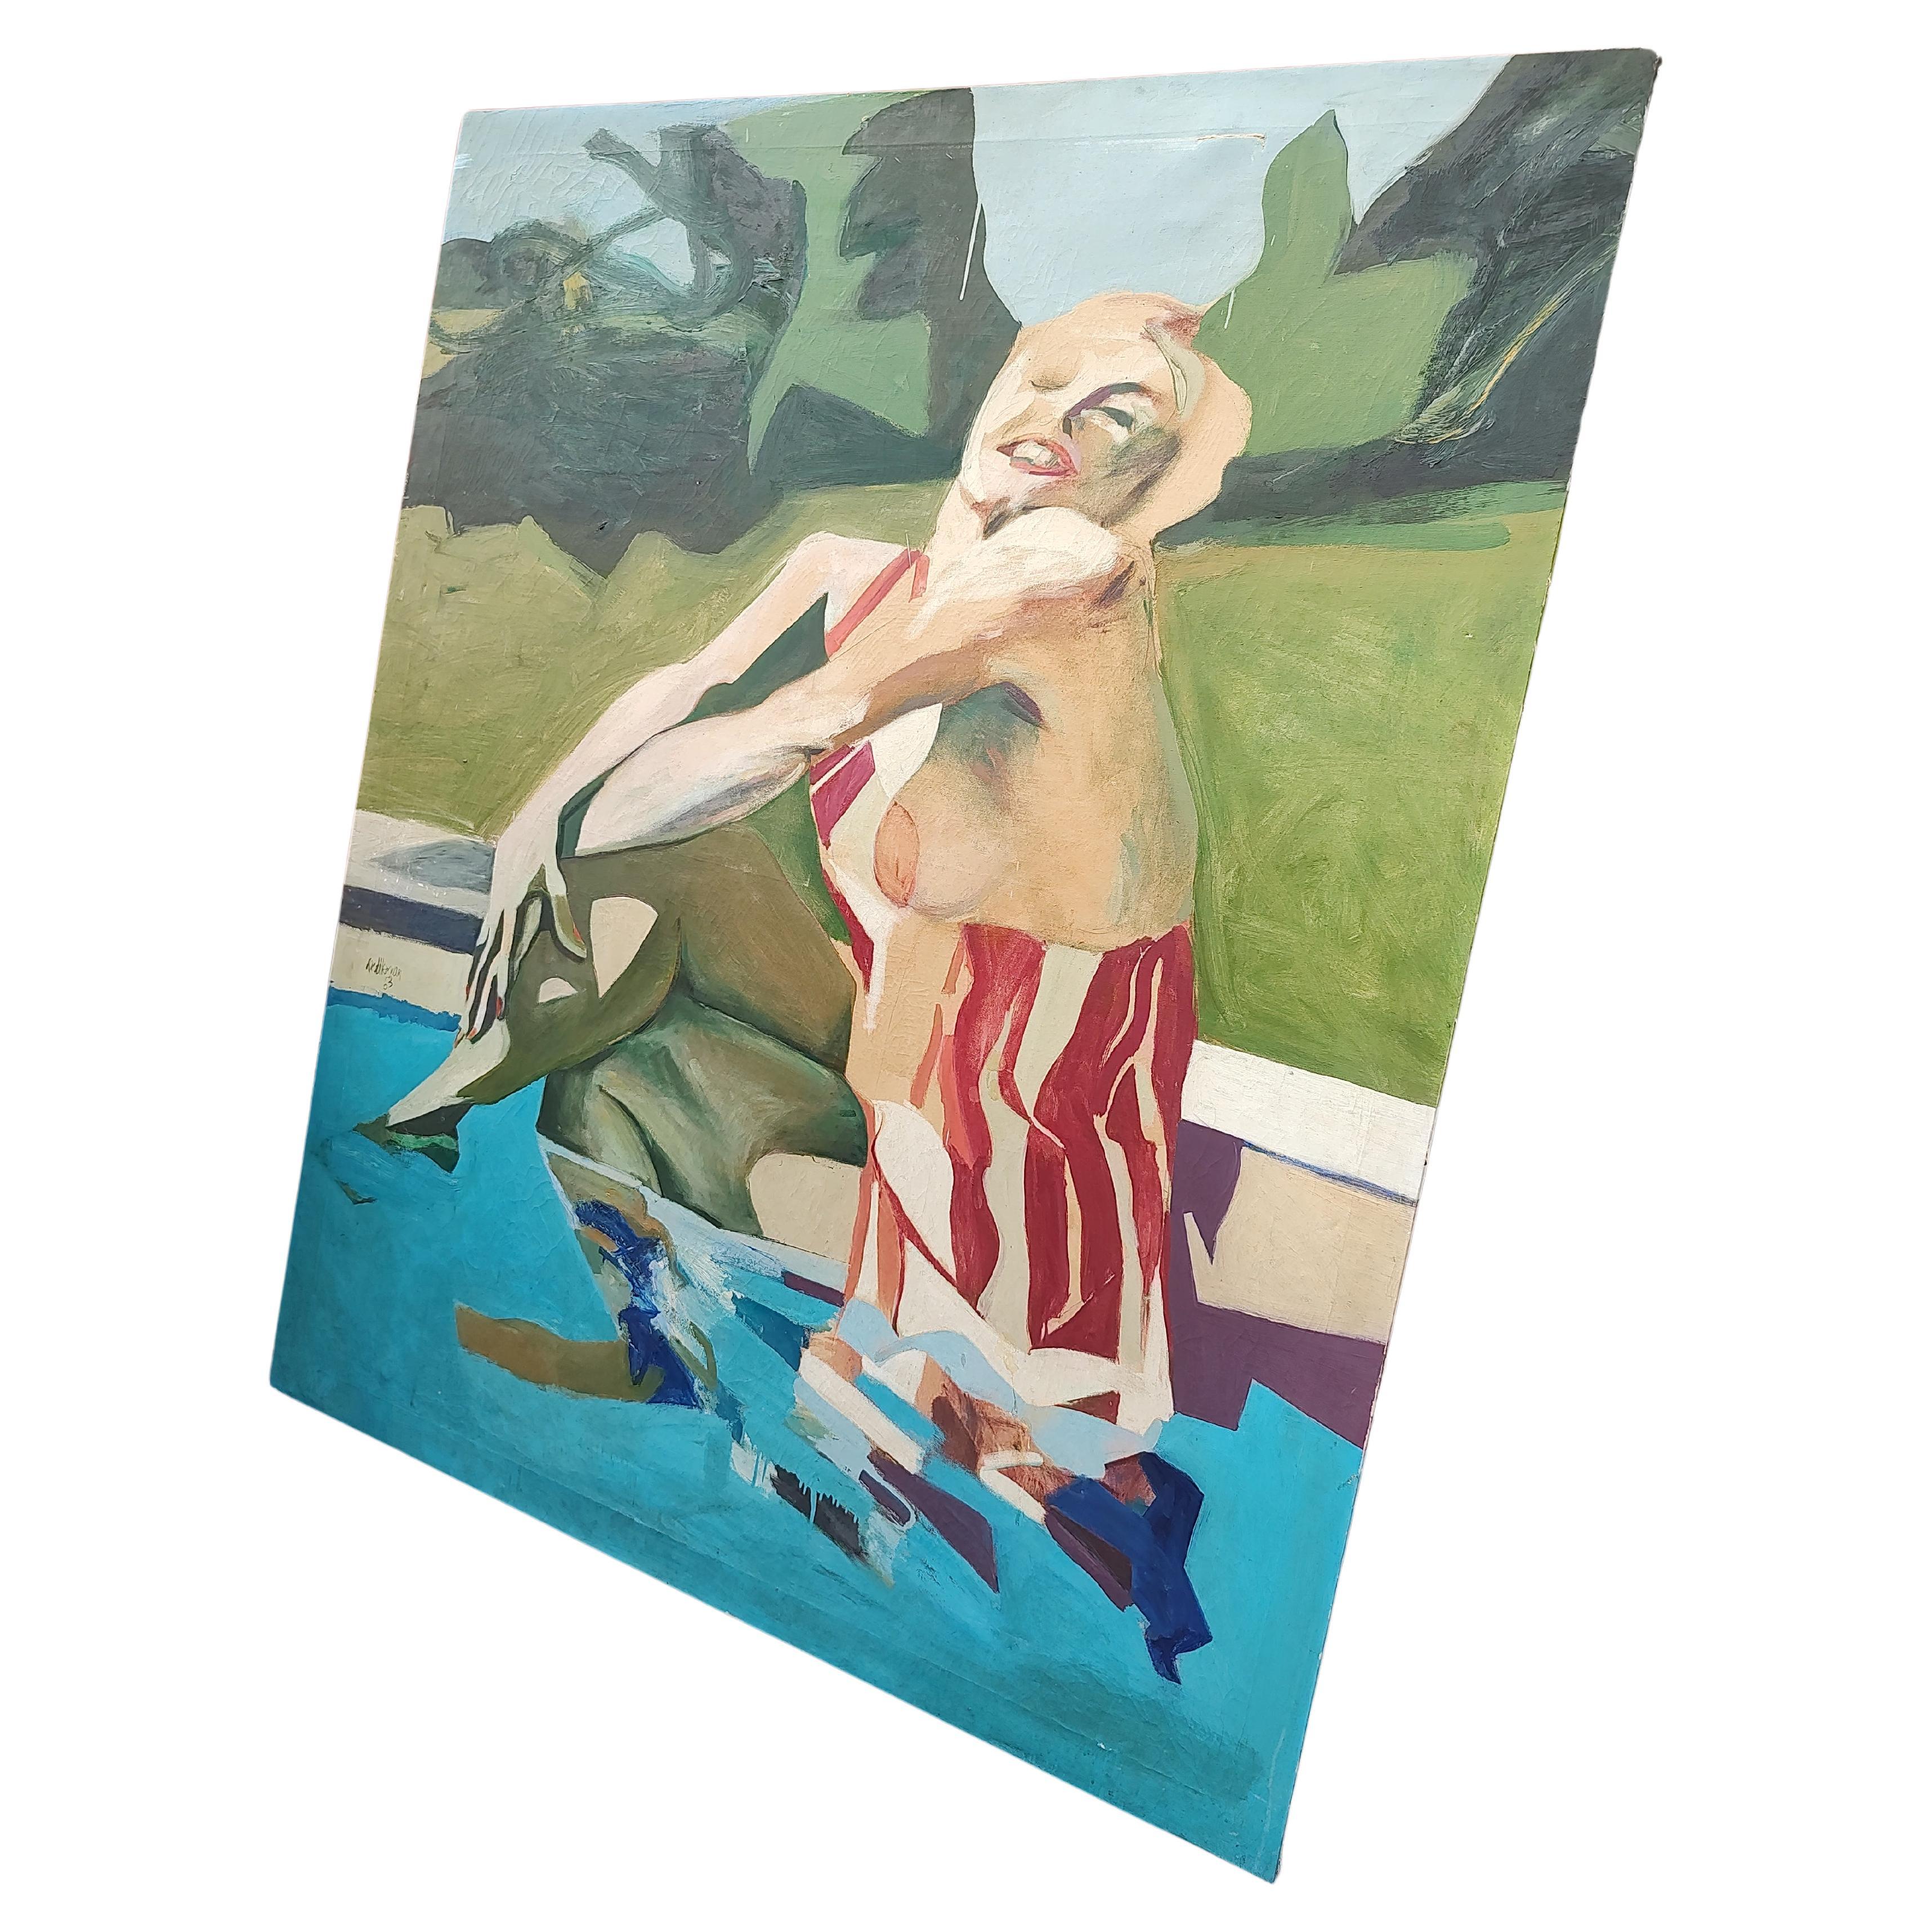 Large Mid Century Modern Painting of a Marilynesque Figure by the Pool 1963 For Sale